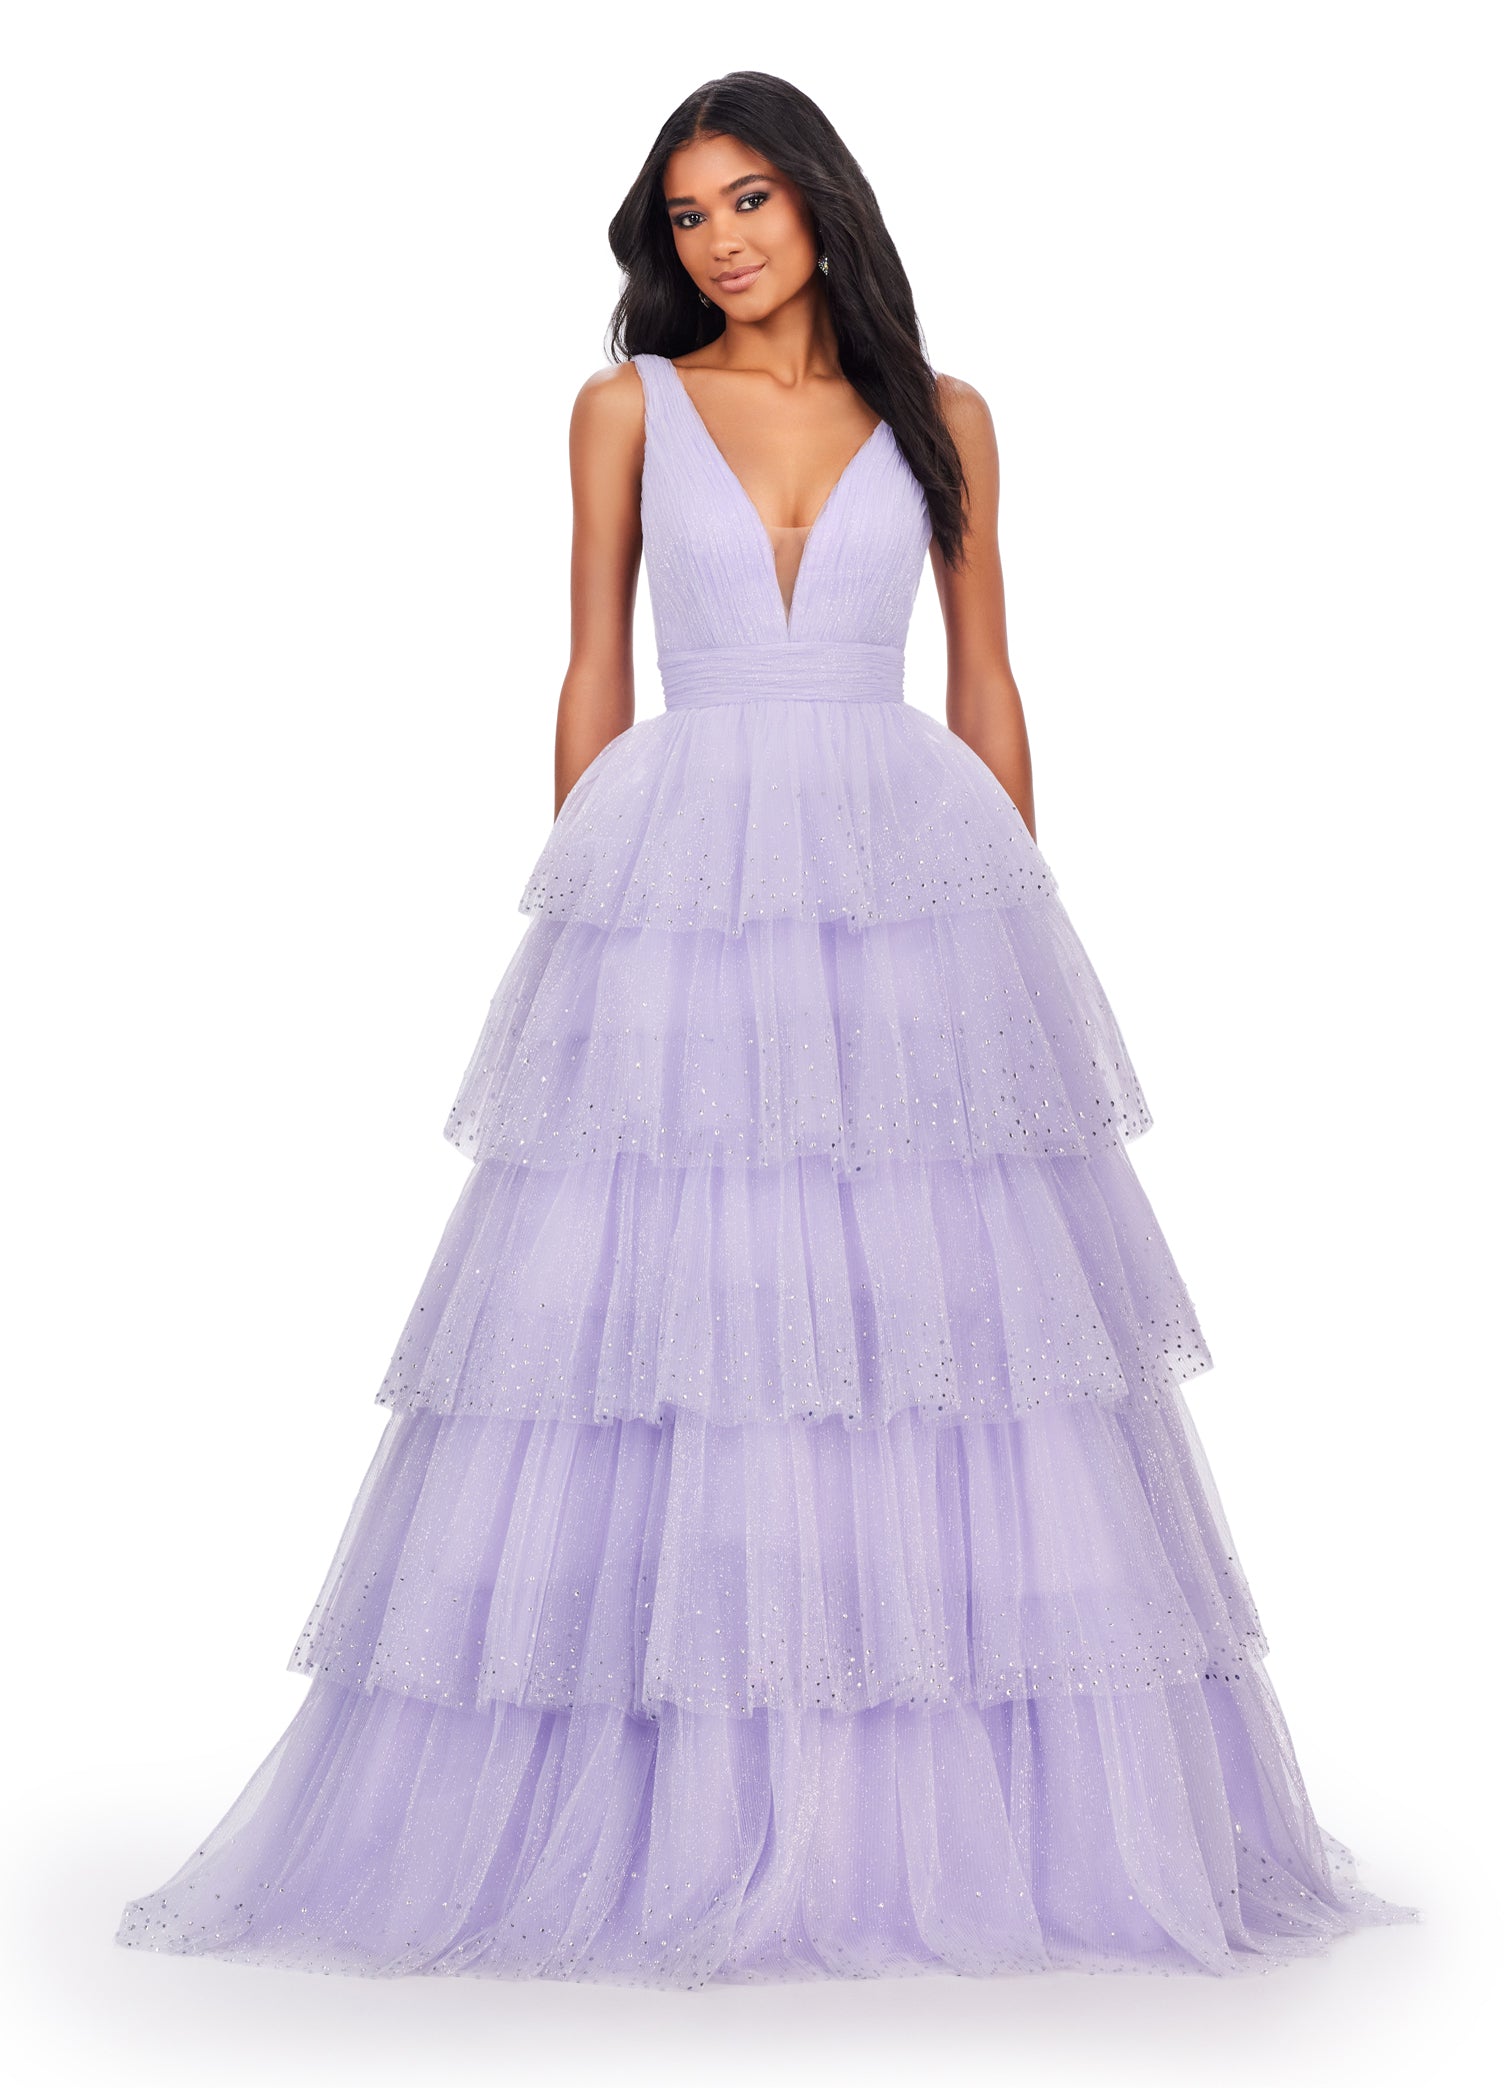 Ashley Lauren 11672 Long Layered Tulle Crystal Ball Gown Prom Dress Formal  Pageant